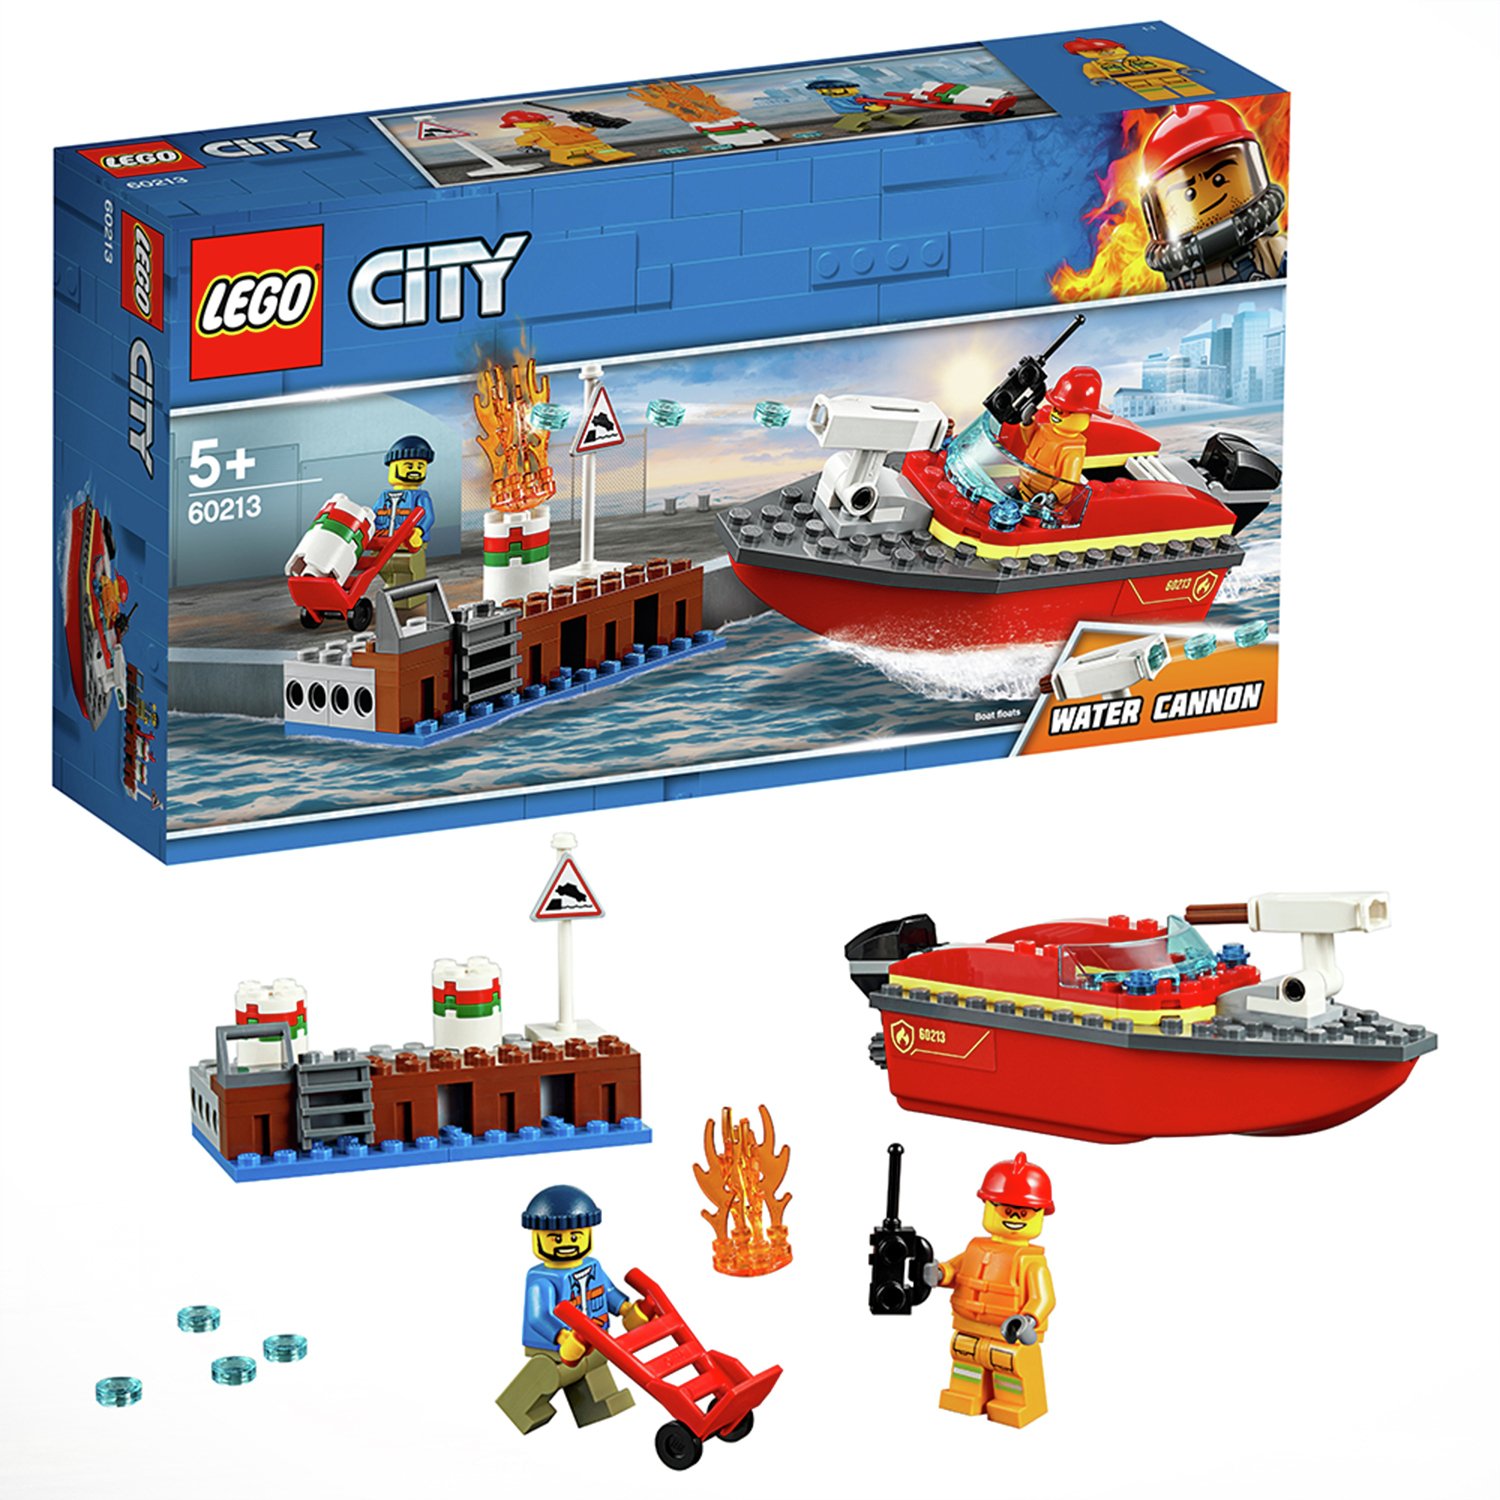 LEGO City Fire Dock Side Fire Toy Boat Playset - 60213